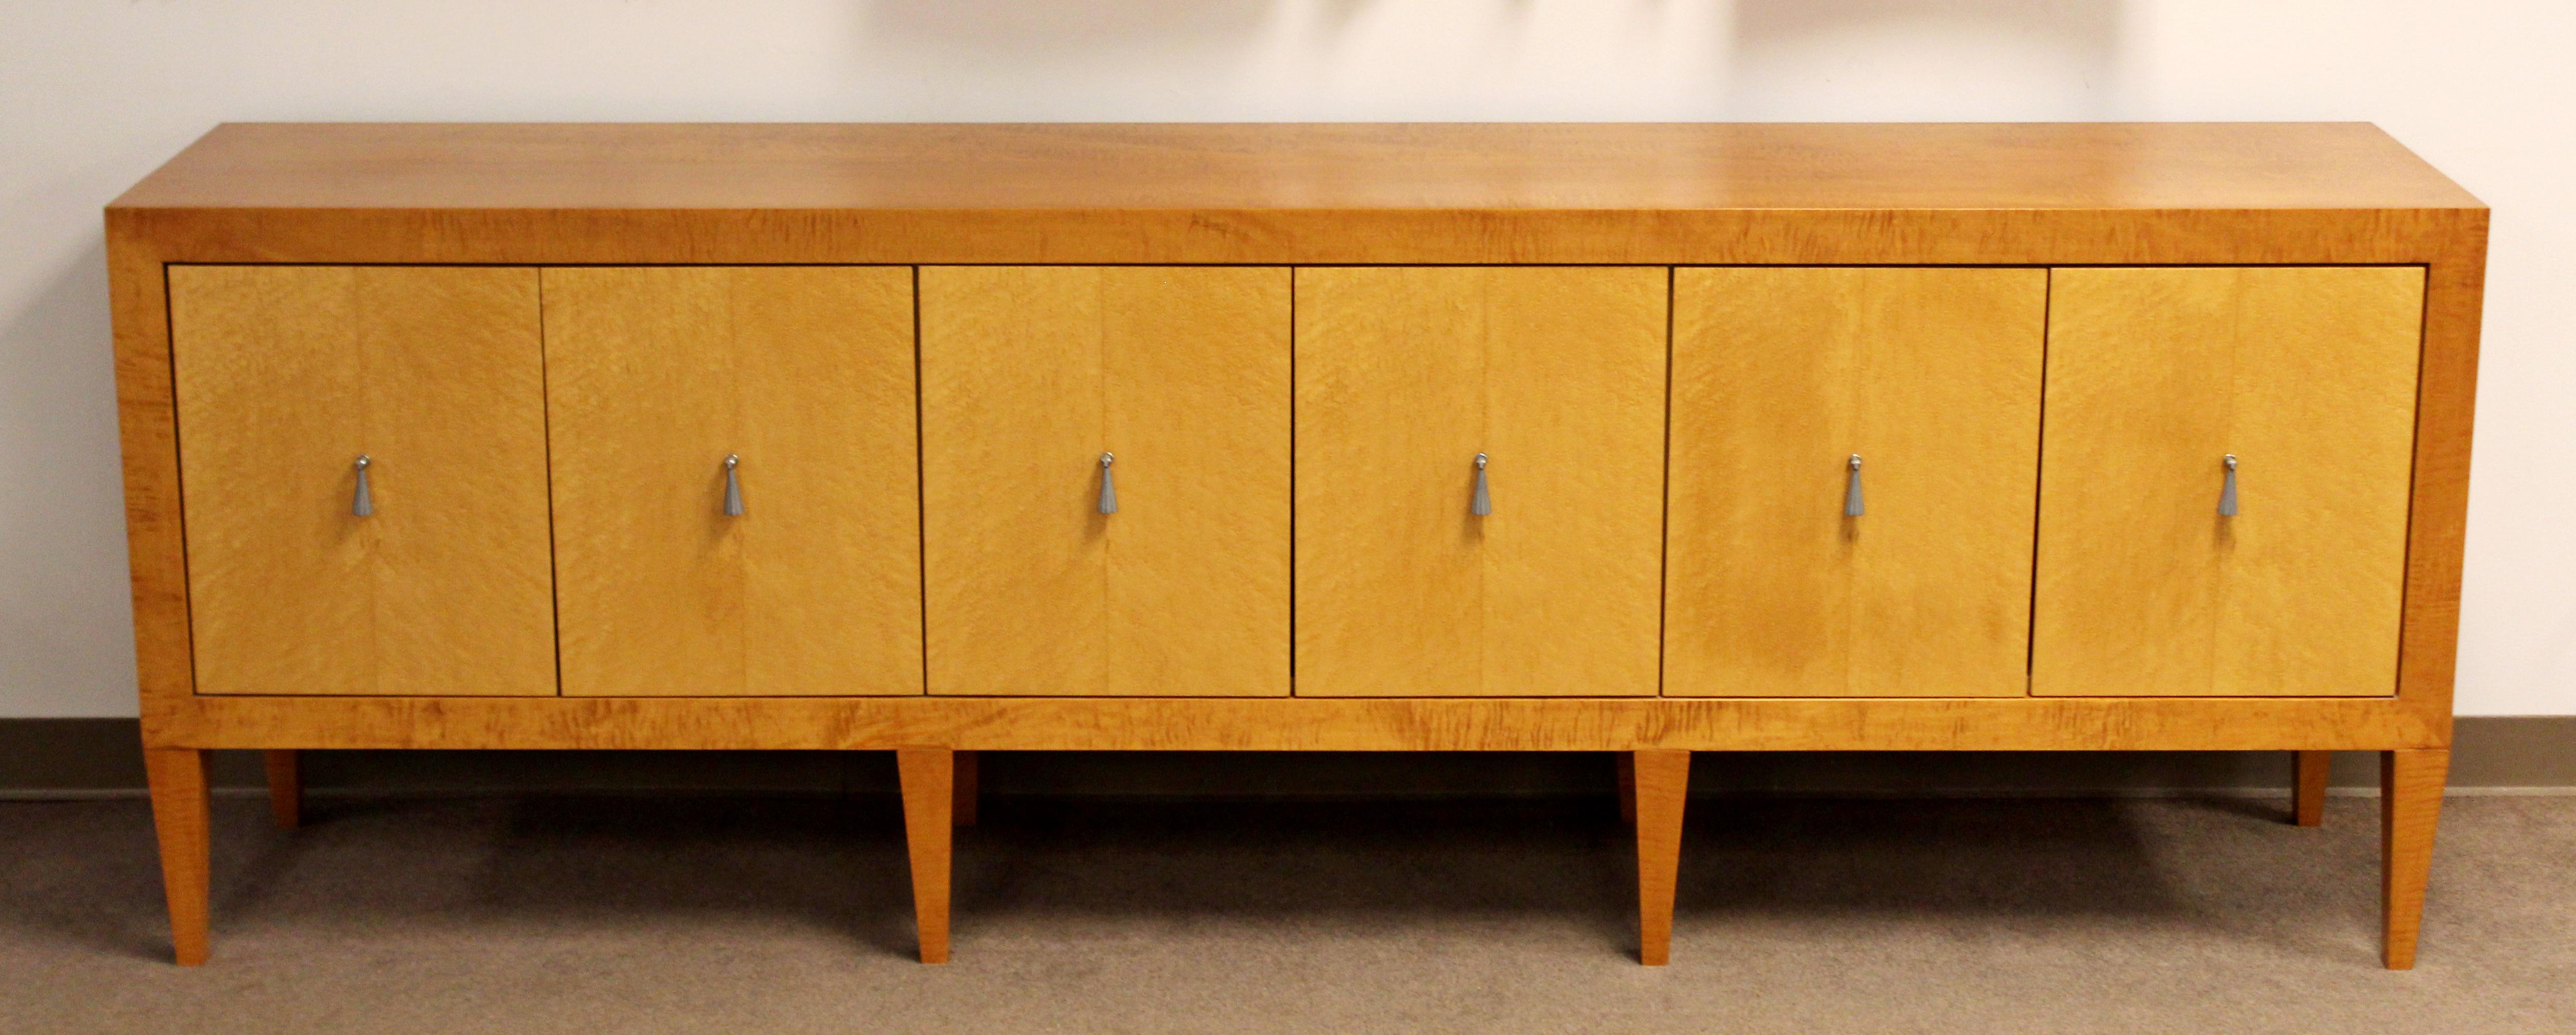 For your consideration is a beautiful long blonde wood credenza, with lovely aluminum pulls, by Baker, circa 1970s. In excellent condition. The dimensions are 96